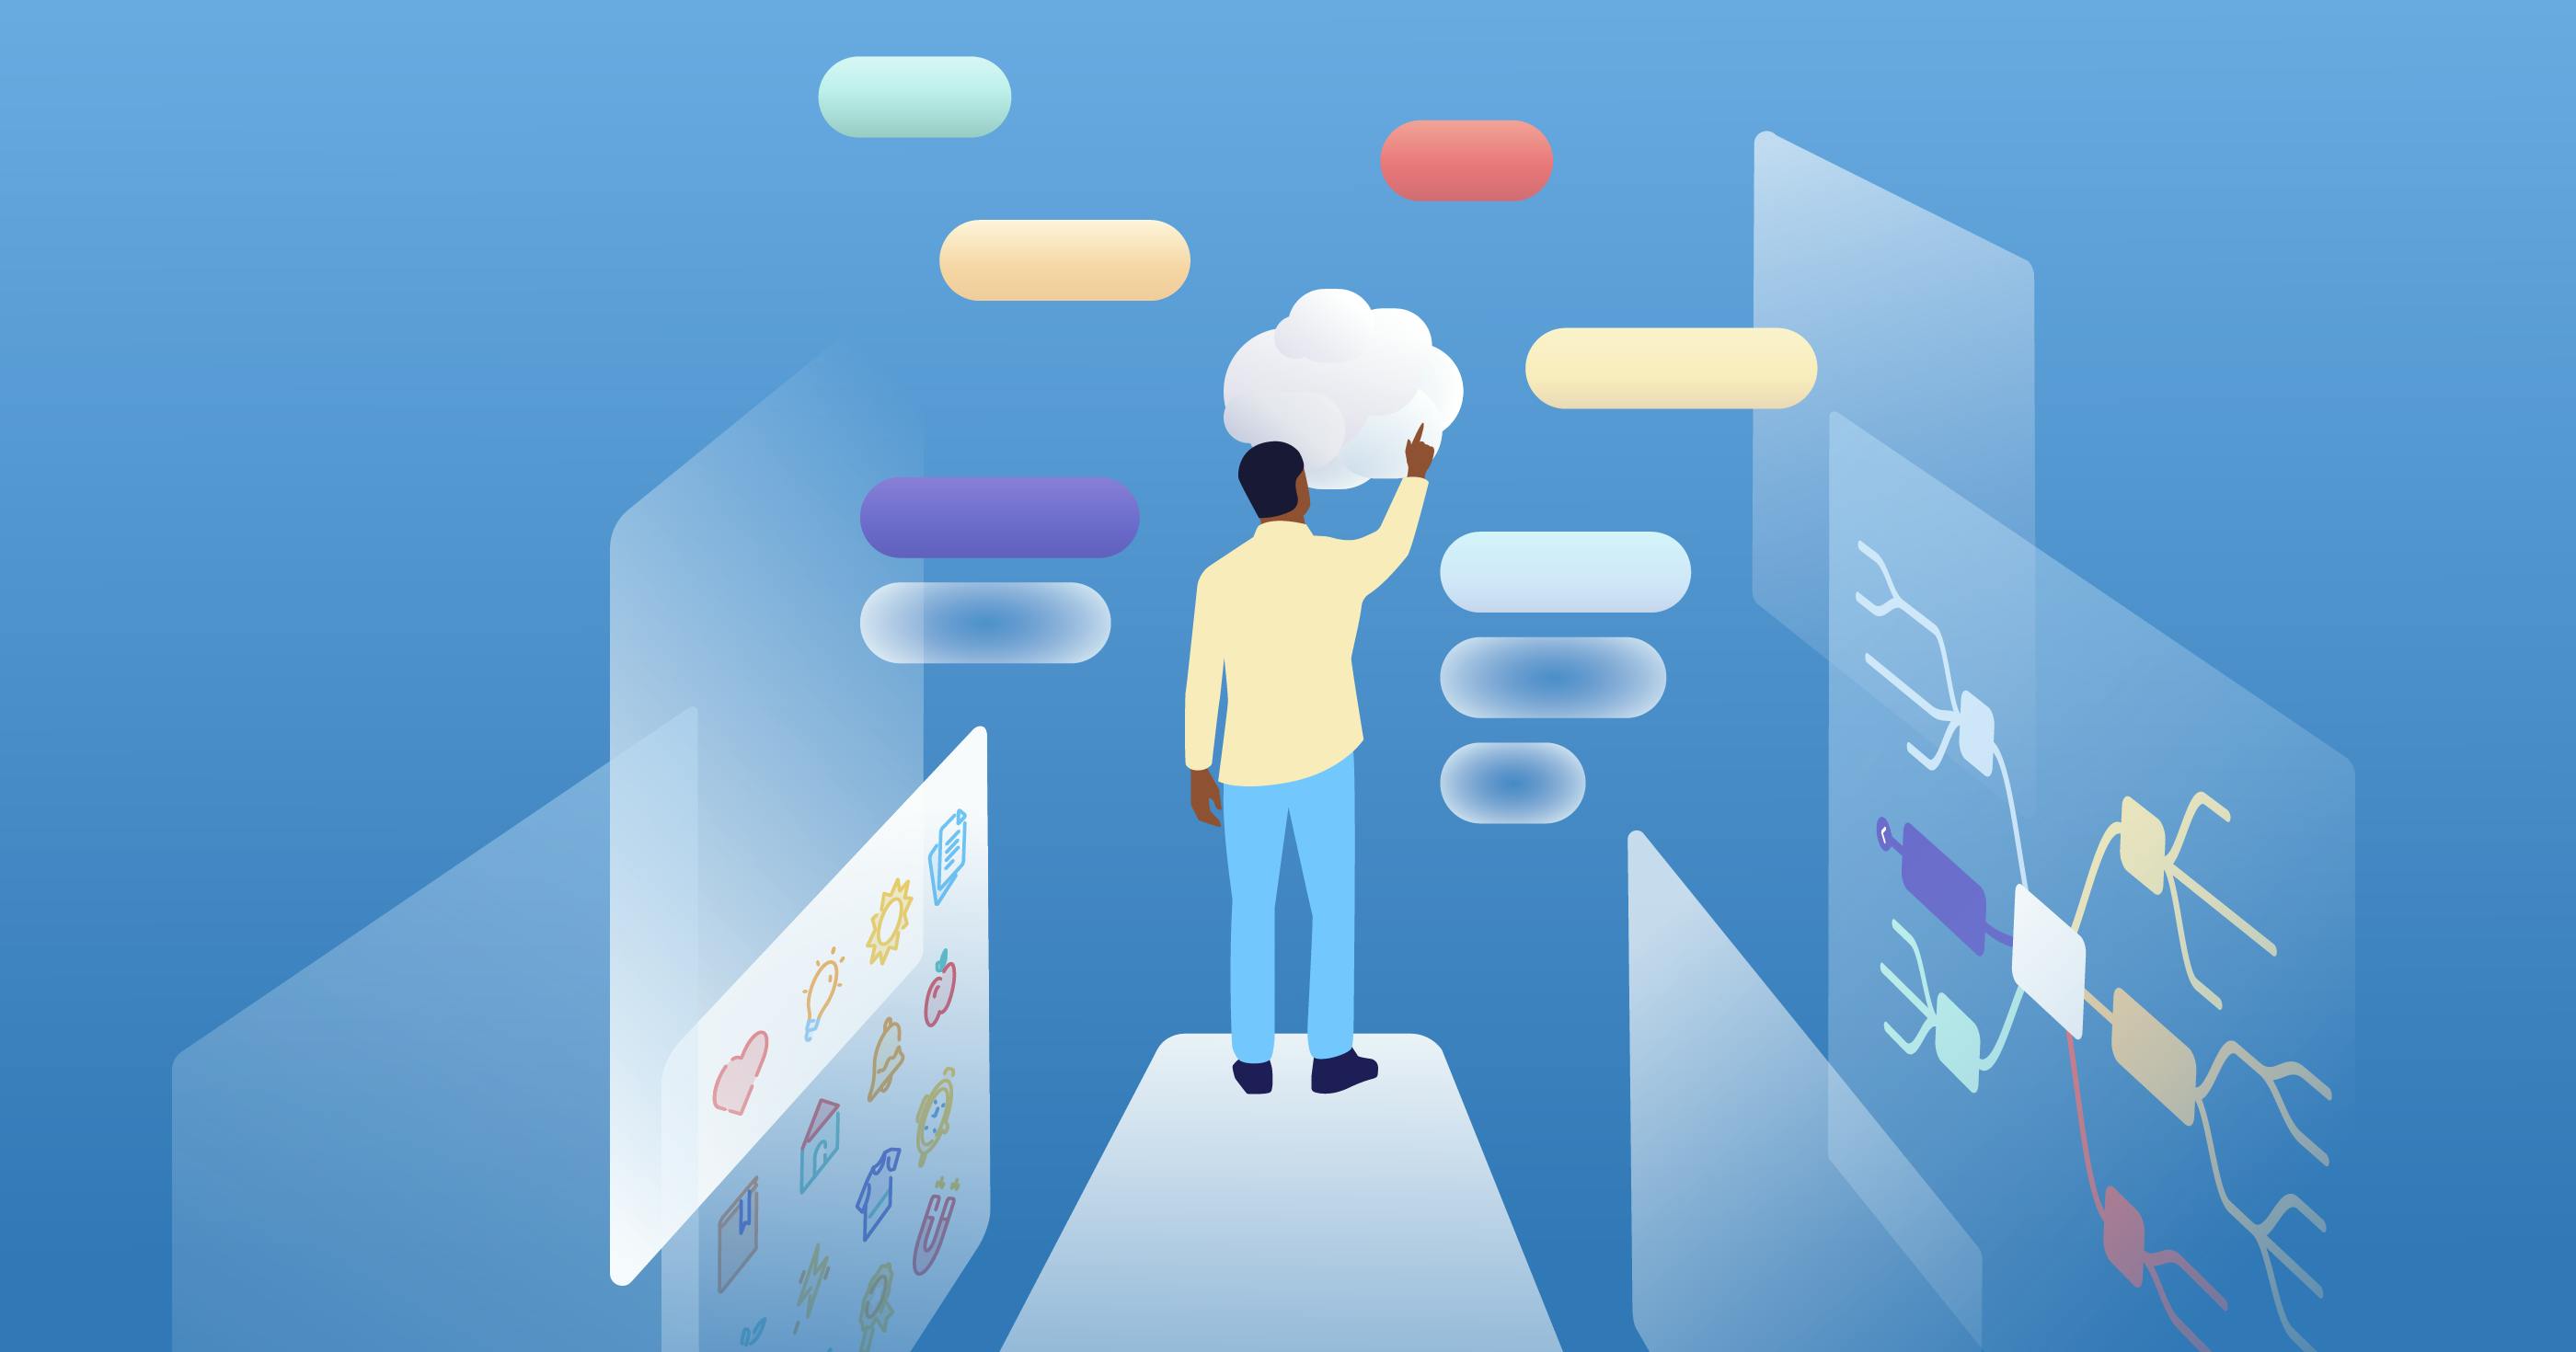 An illustration of a person standing on a ledge. In front of them is a cloud which they are touching with the index finger of their right hand. Around the cloud float pill-shaped nodes. Left and right of the person are floating app windows. On one you can see different MindNode stickers, on another a mind map.